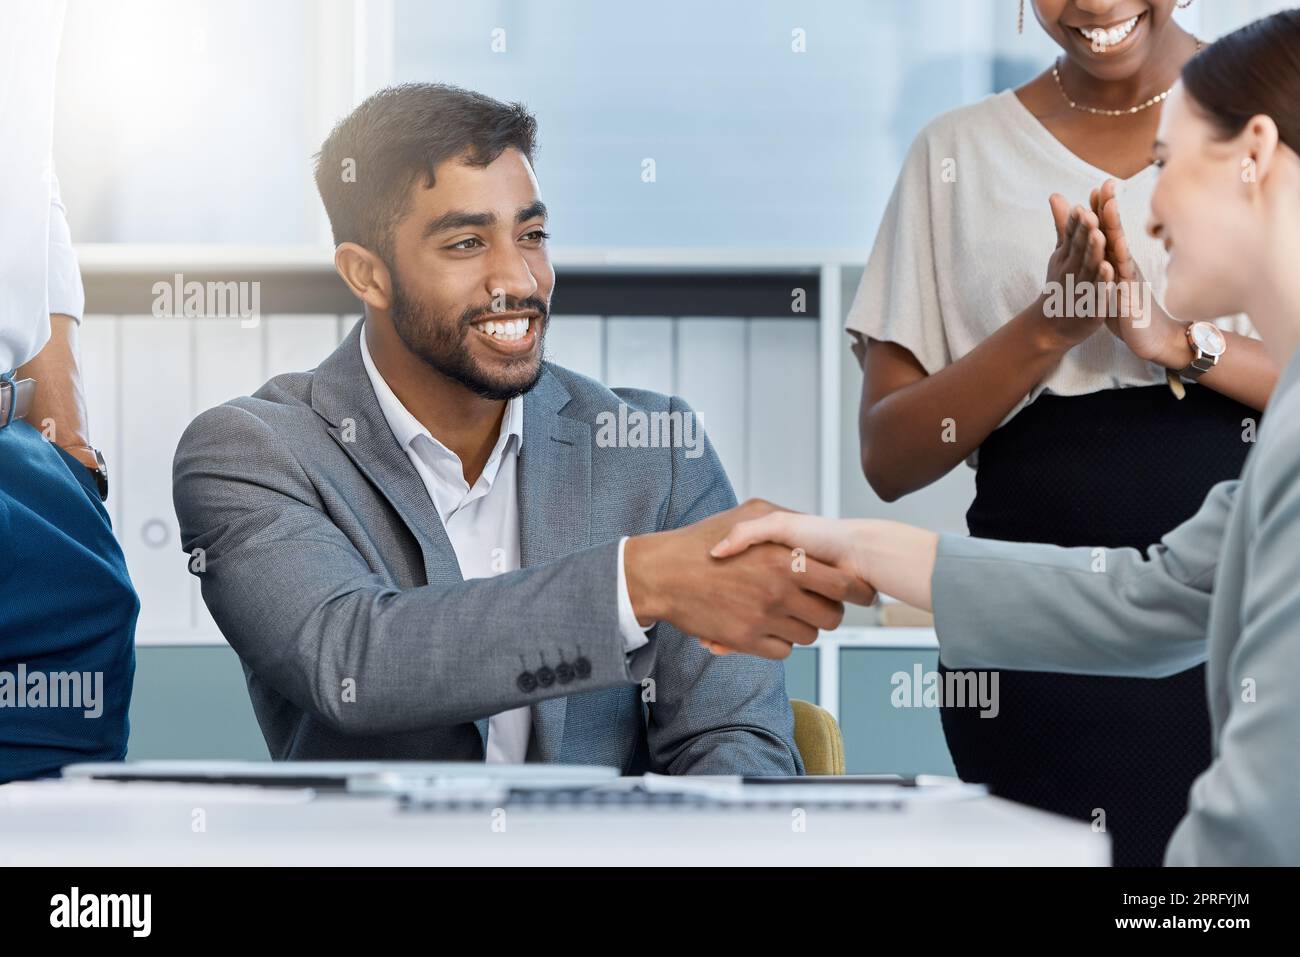 Collaboration, teamwork and motivation handshake by business partner meeting and greeting in corporate office. Diverse colleagues celebrating a startup goal or vision, united on mission for success Stock Photo